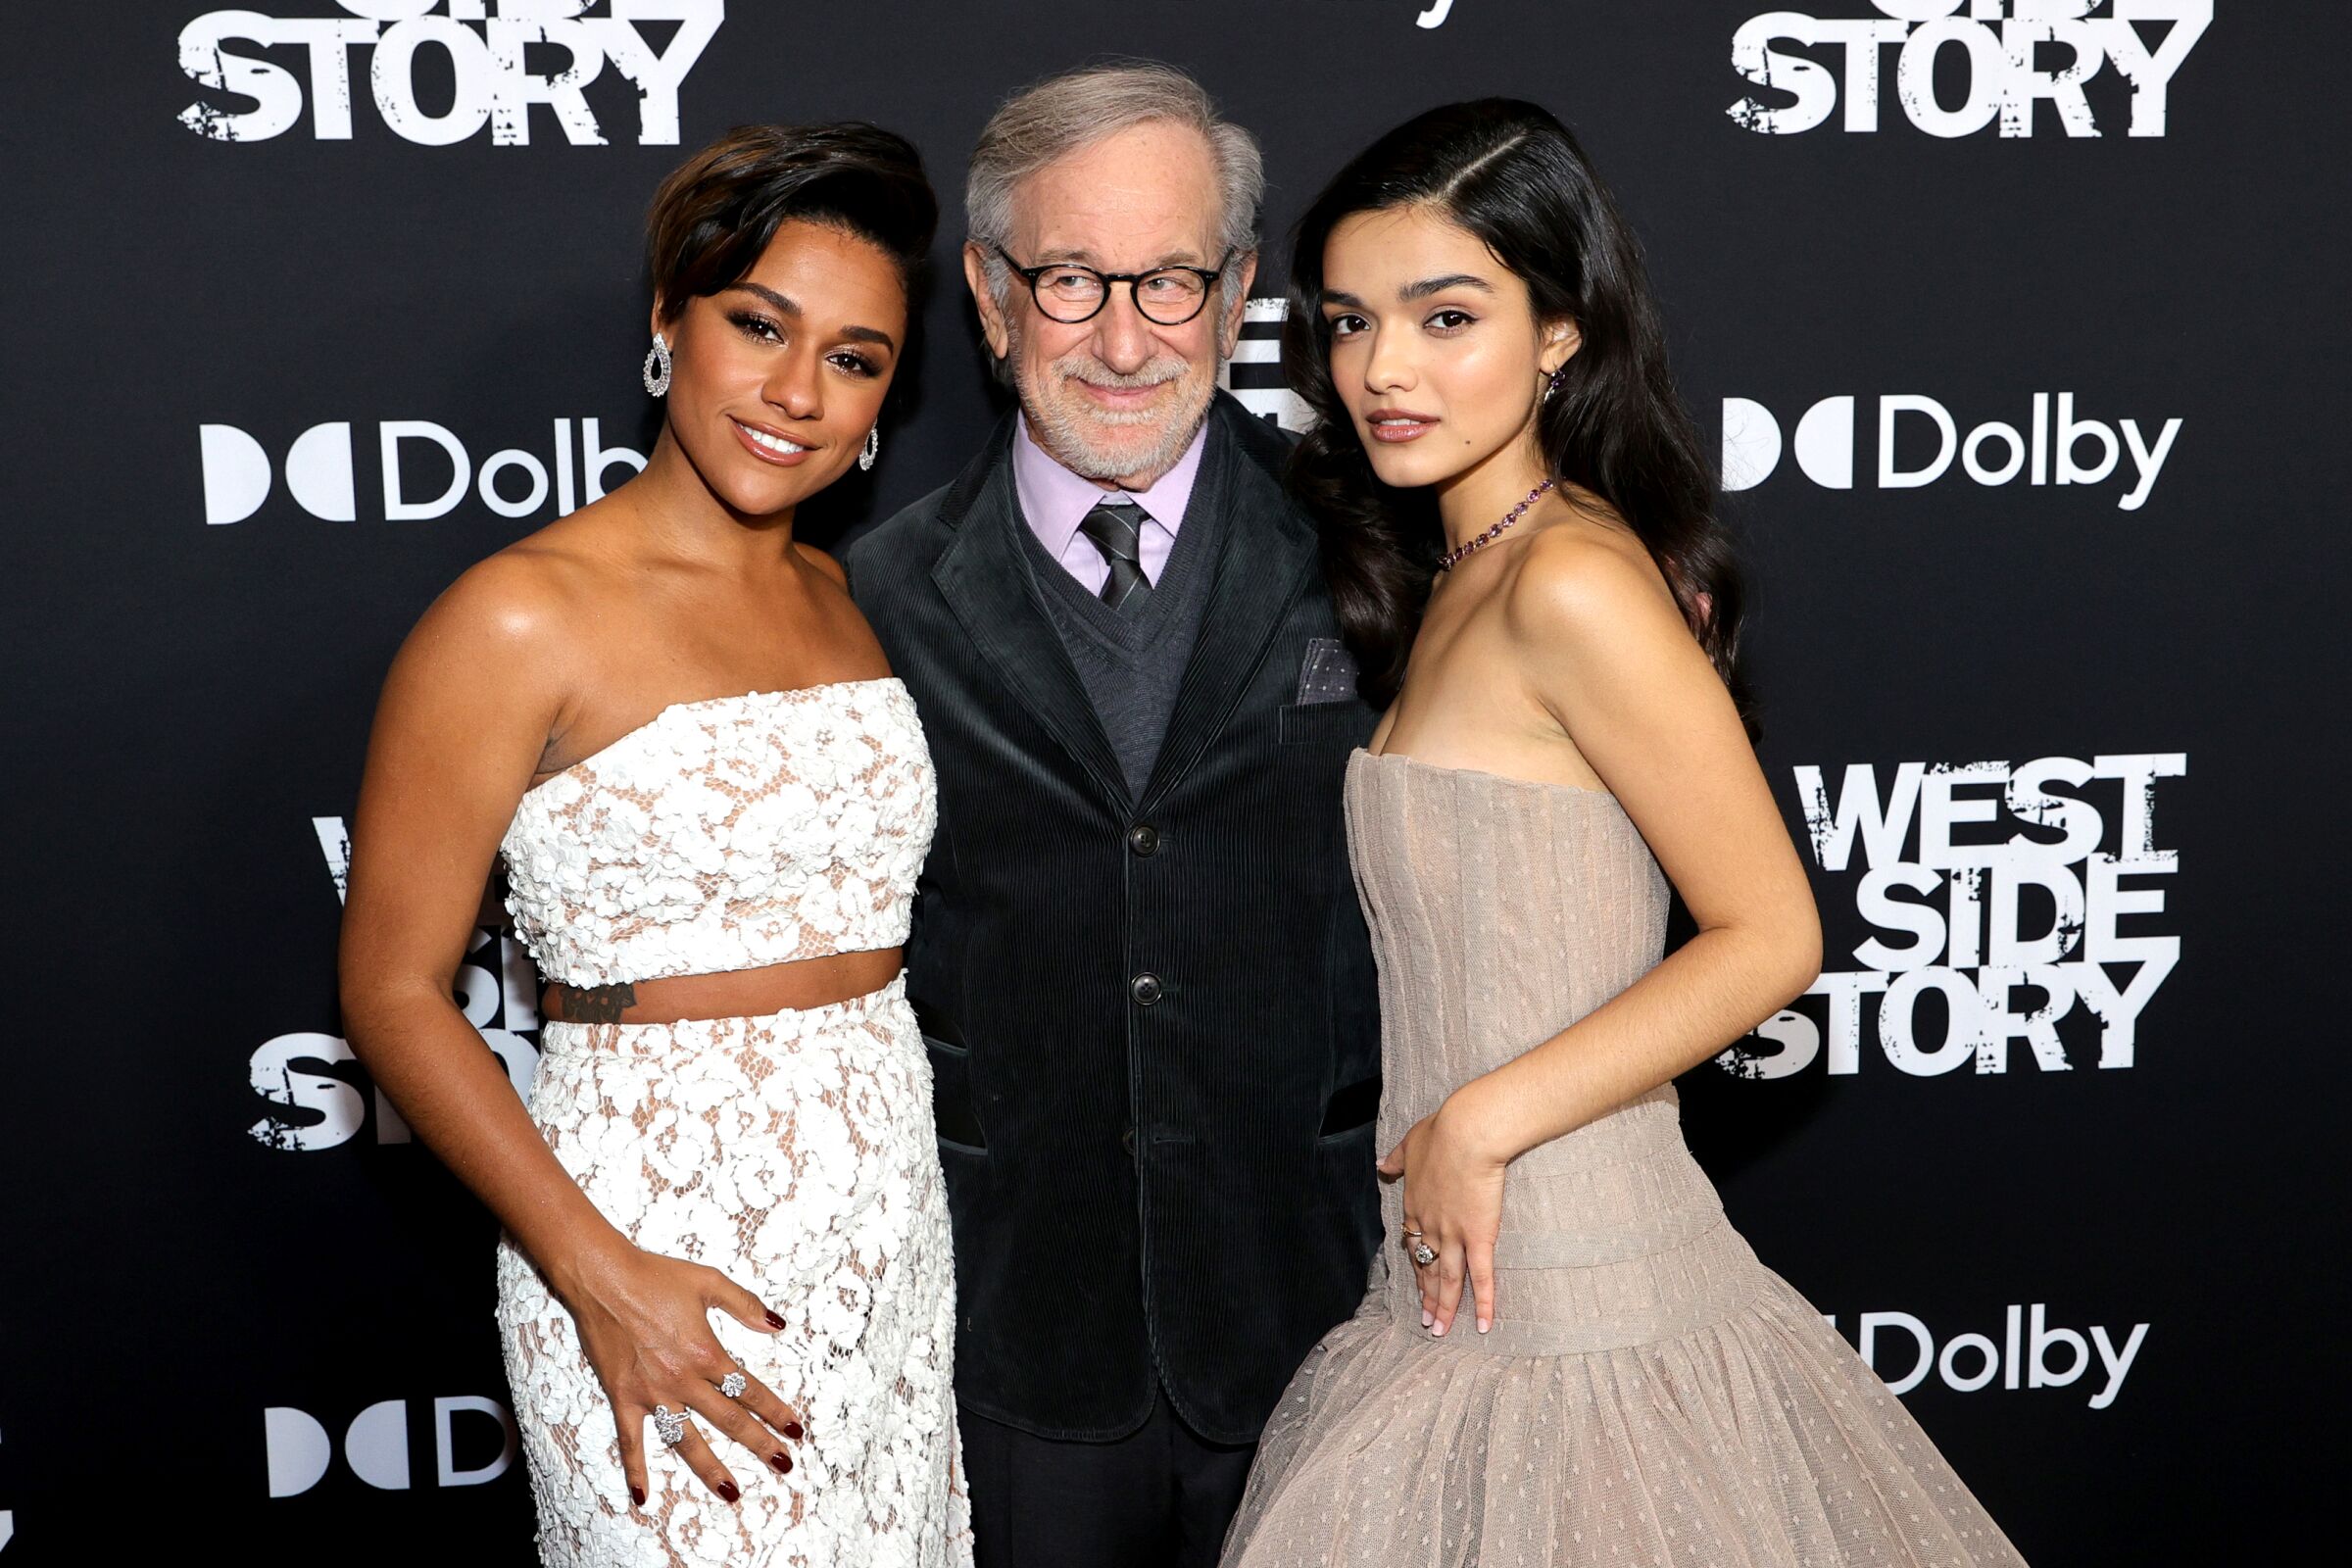 A man is flanked by two women in evening gowns at the New York premiere of "West Side Story."